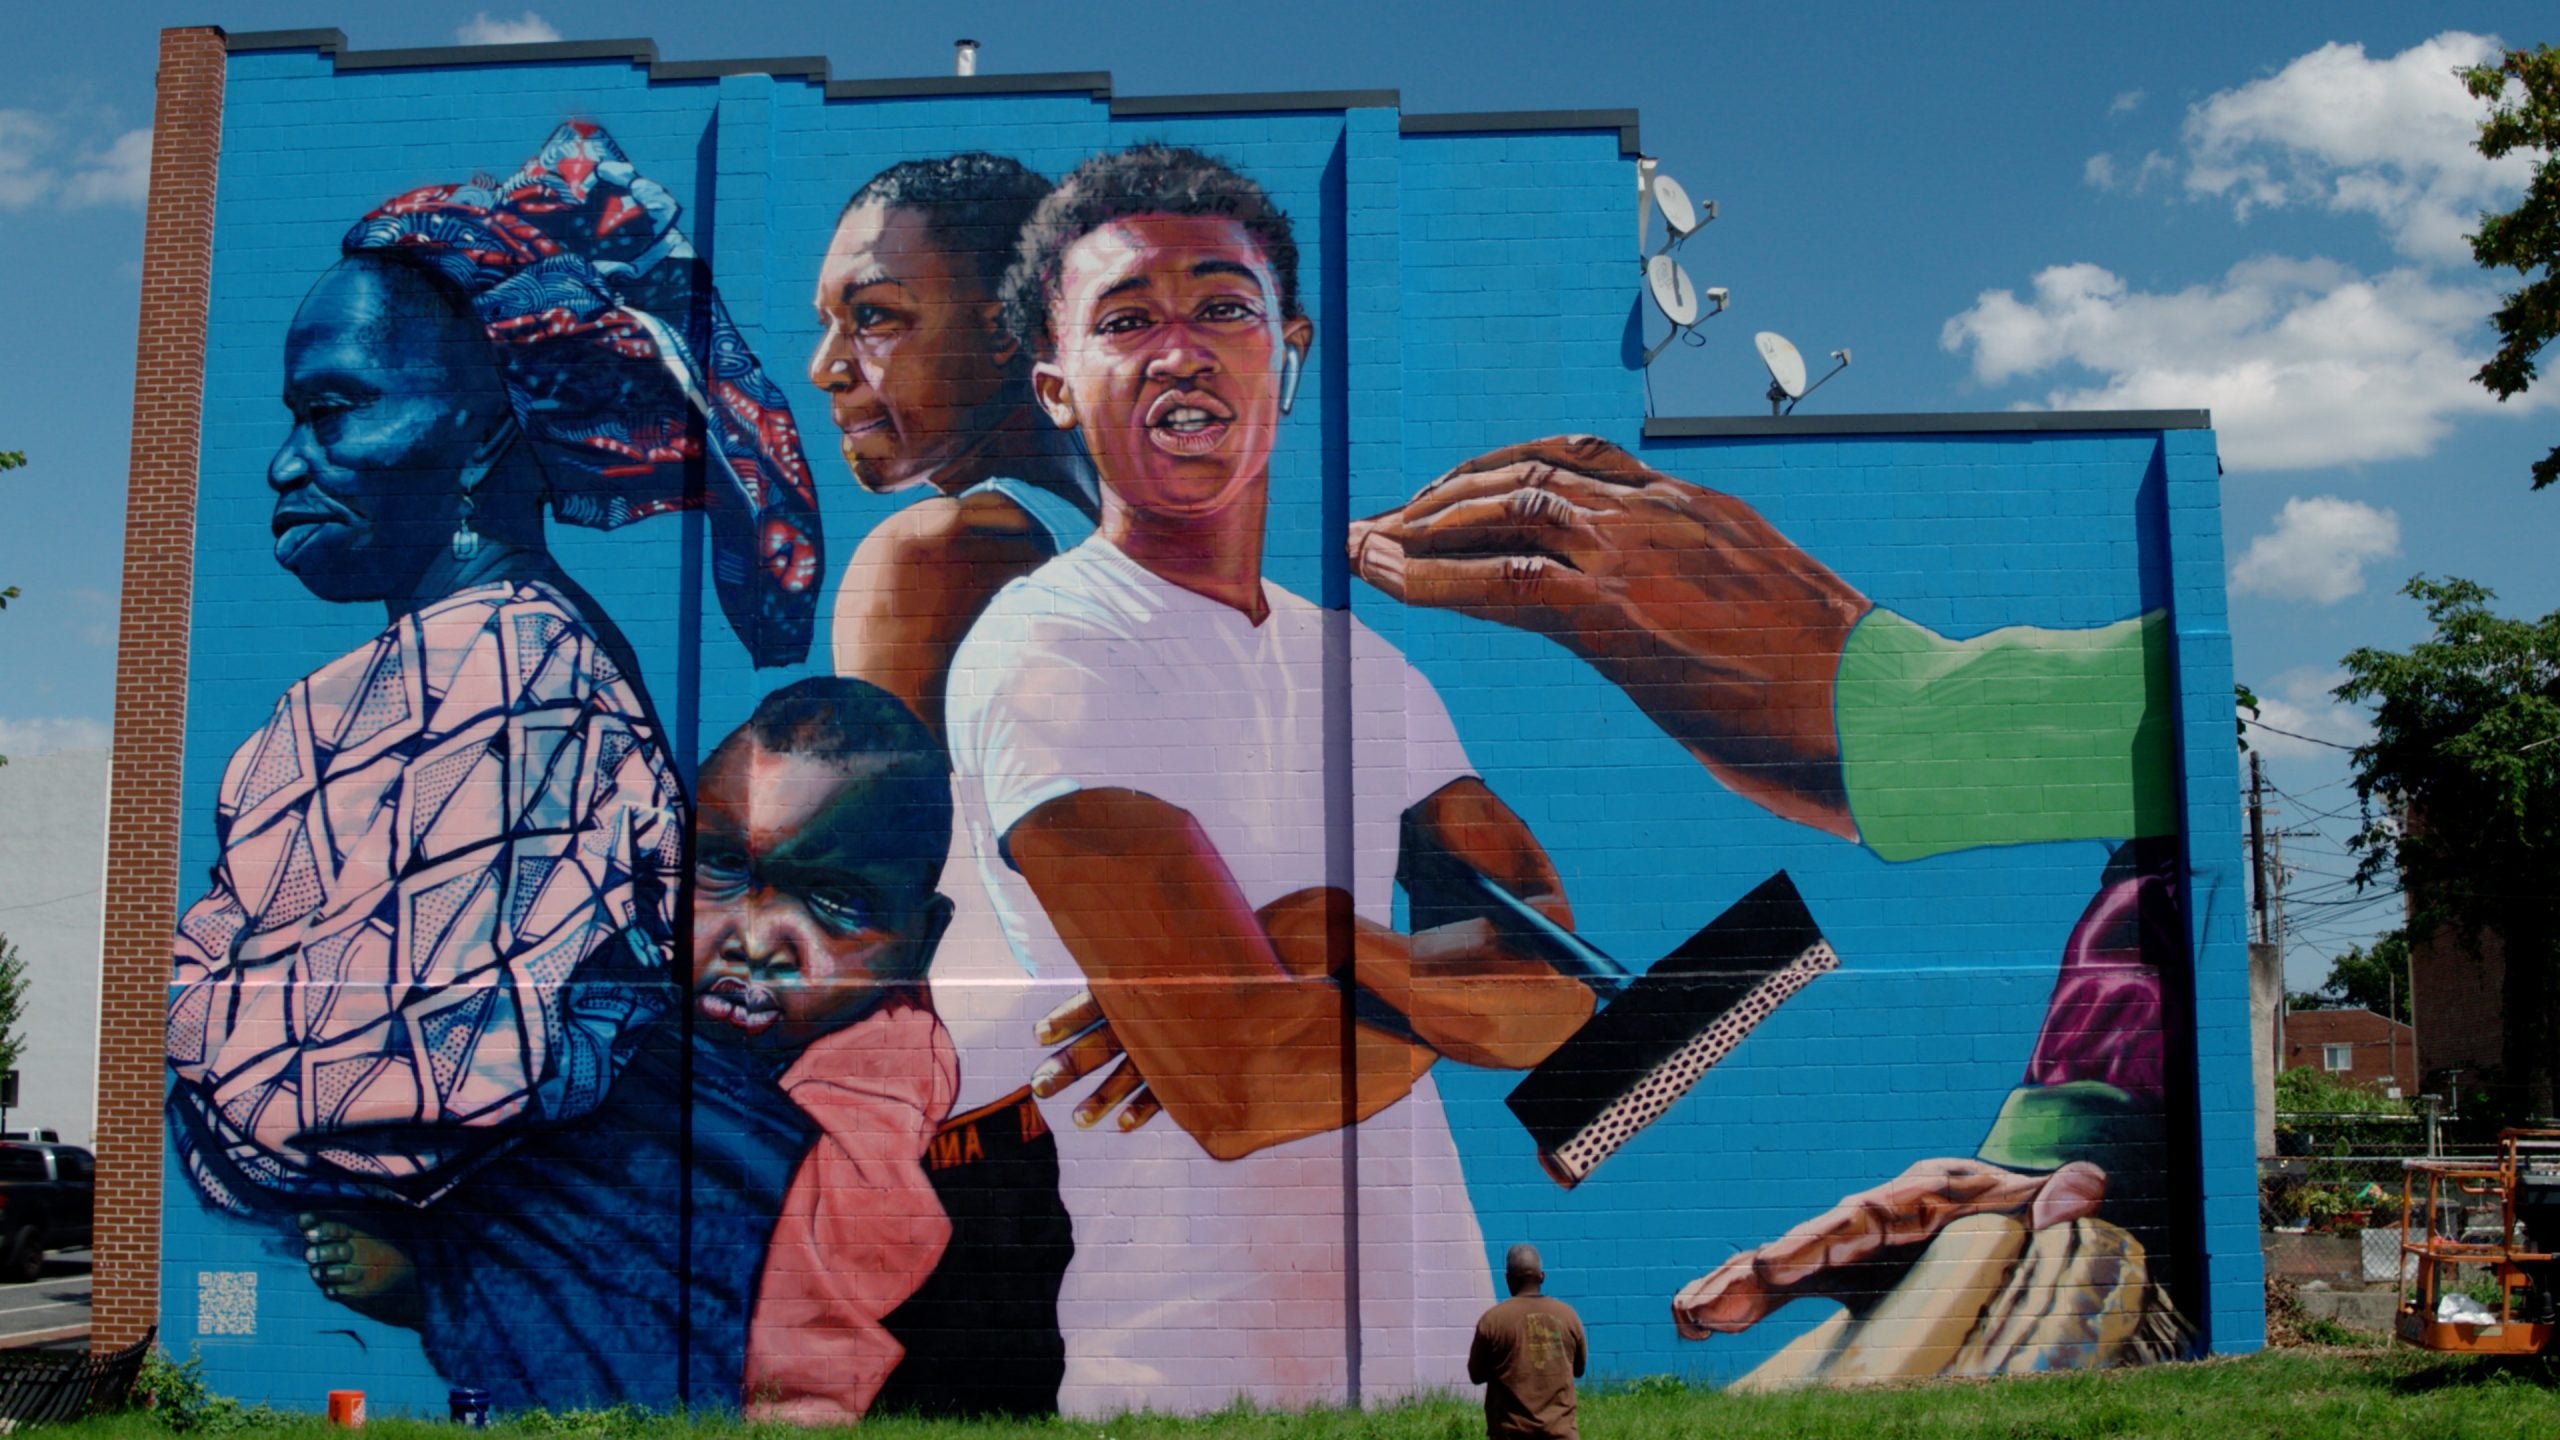 Mended Murals Champions Skin Health For Black Communities